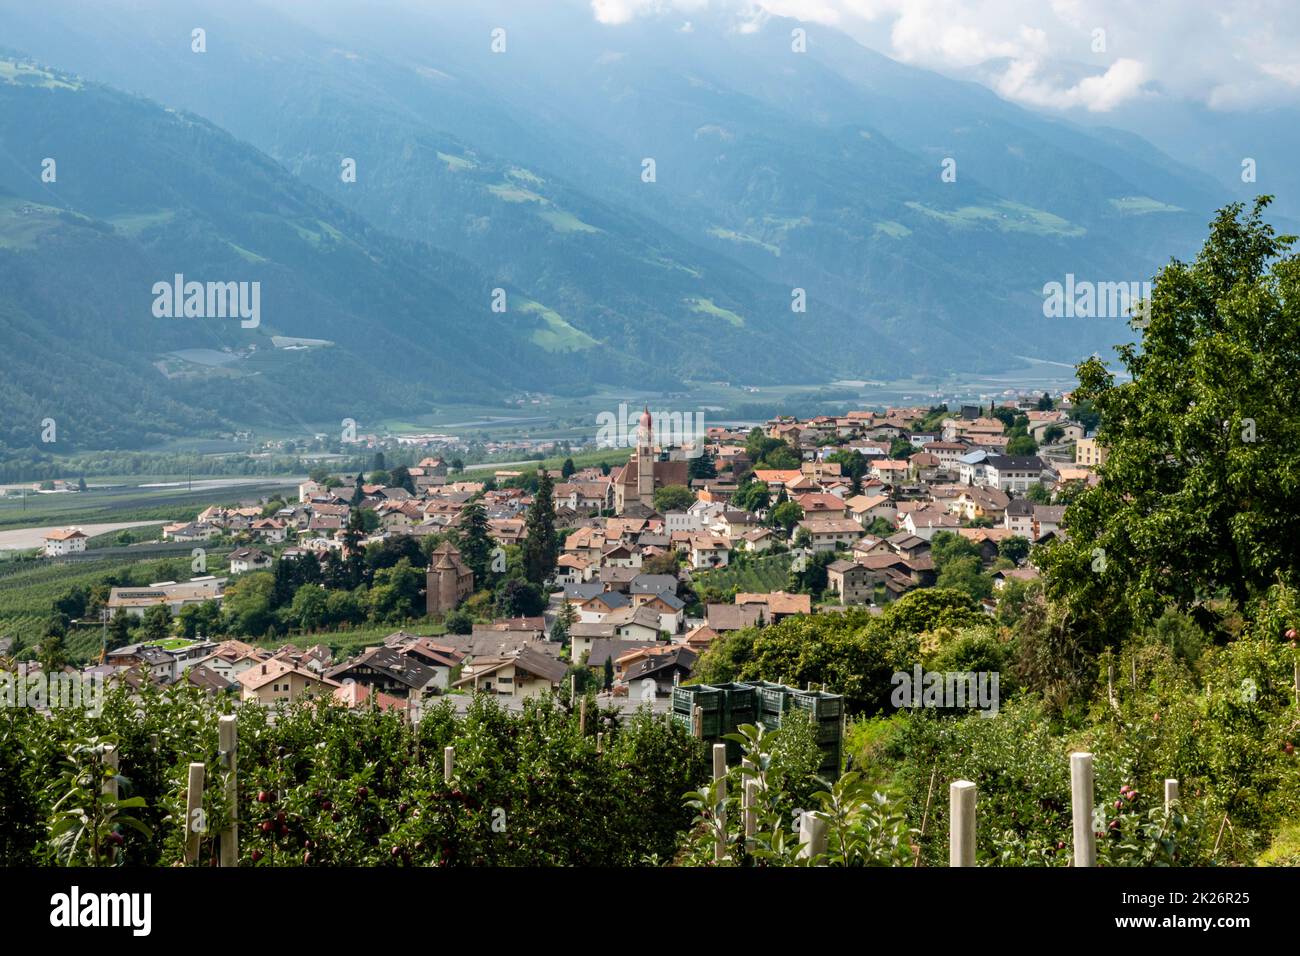 Partschins with Apple Trees, South Tyrol, Italy Stock Photo